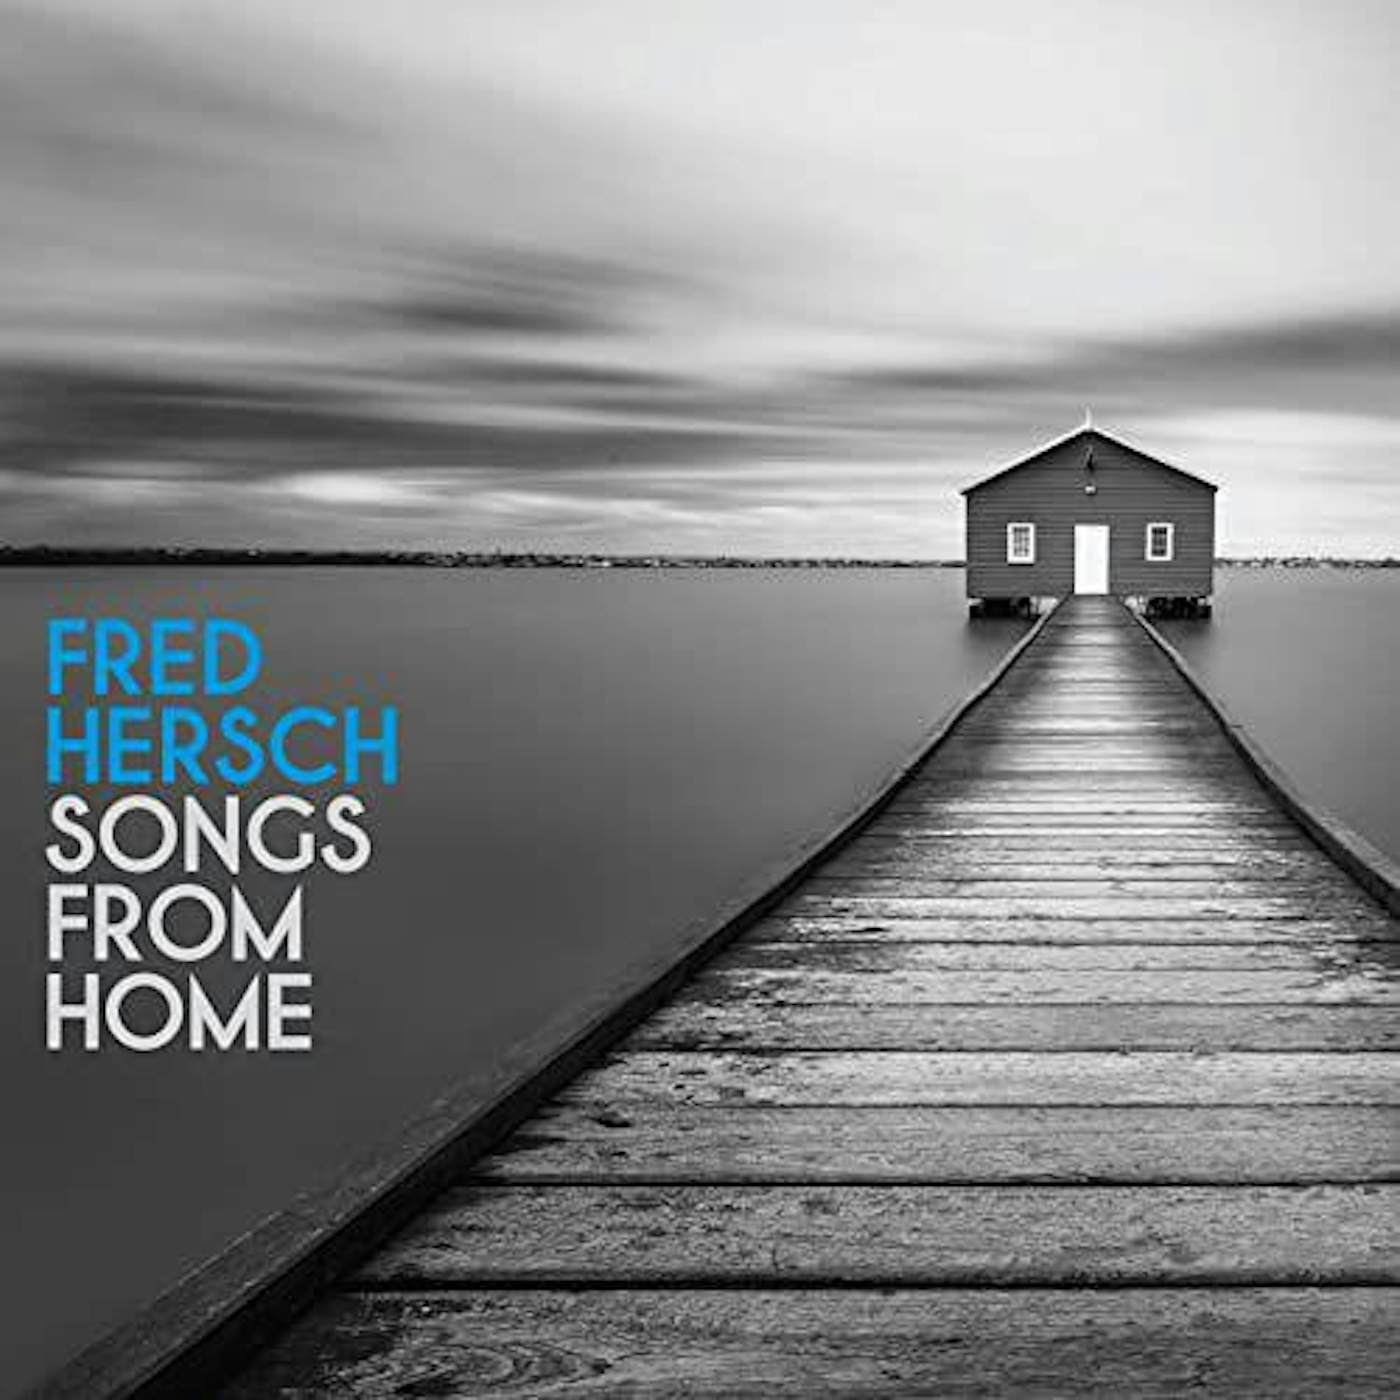 Fred Hersch Songs from Home Vinyl Record